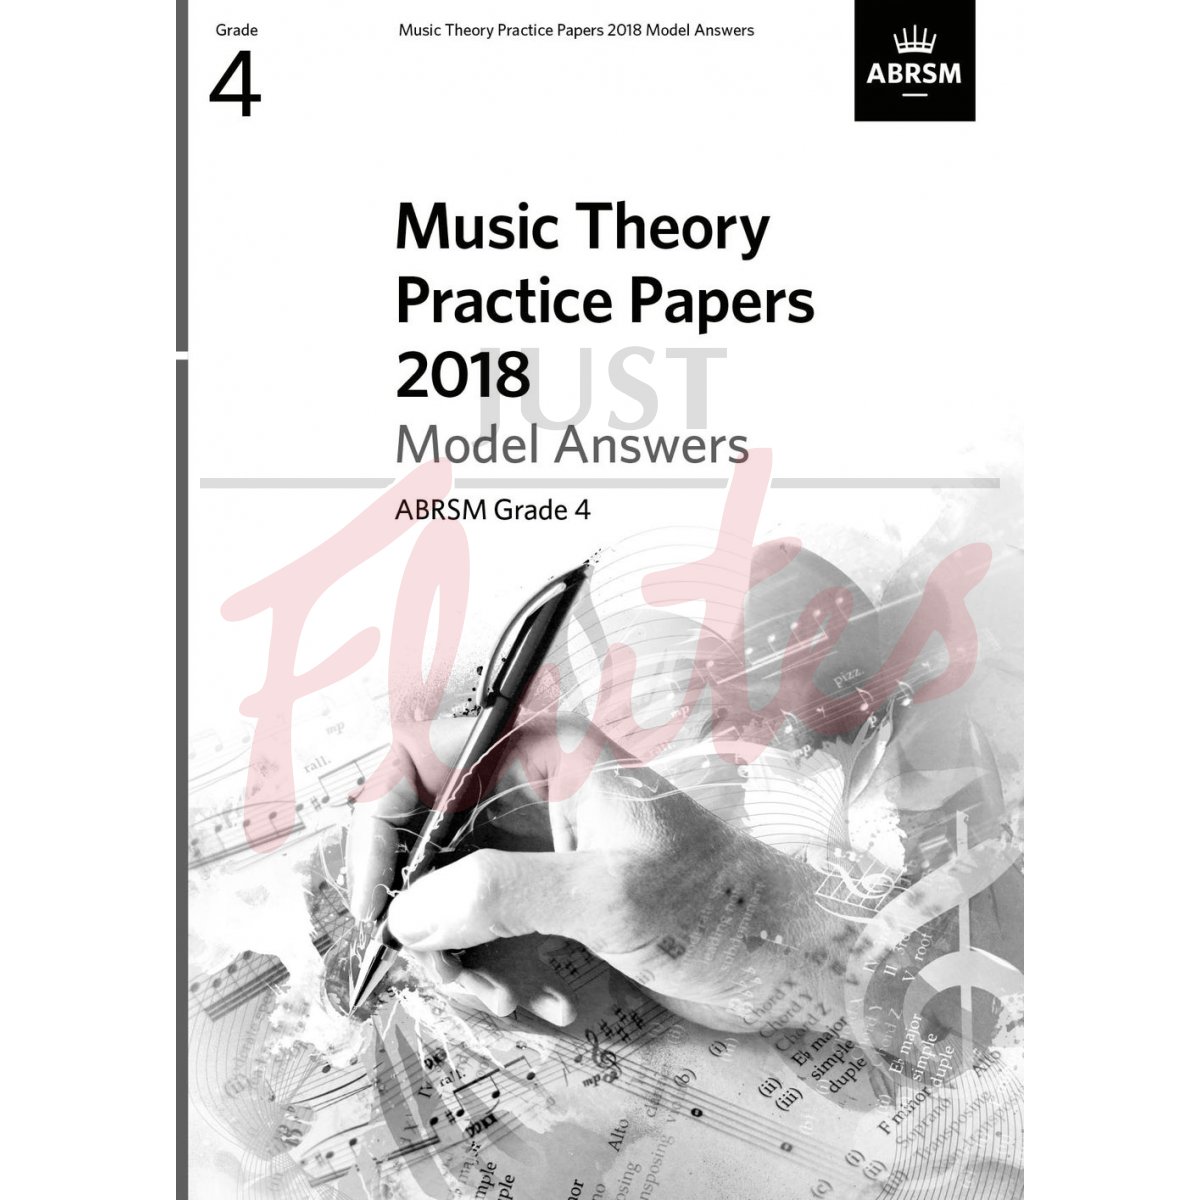 Music Theory Practice Papers 2018 Grade 4 - Model Answers